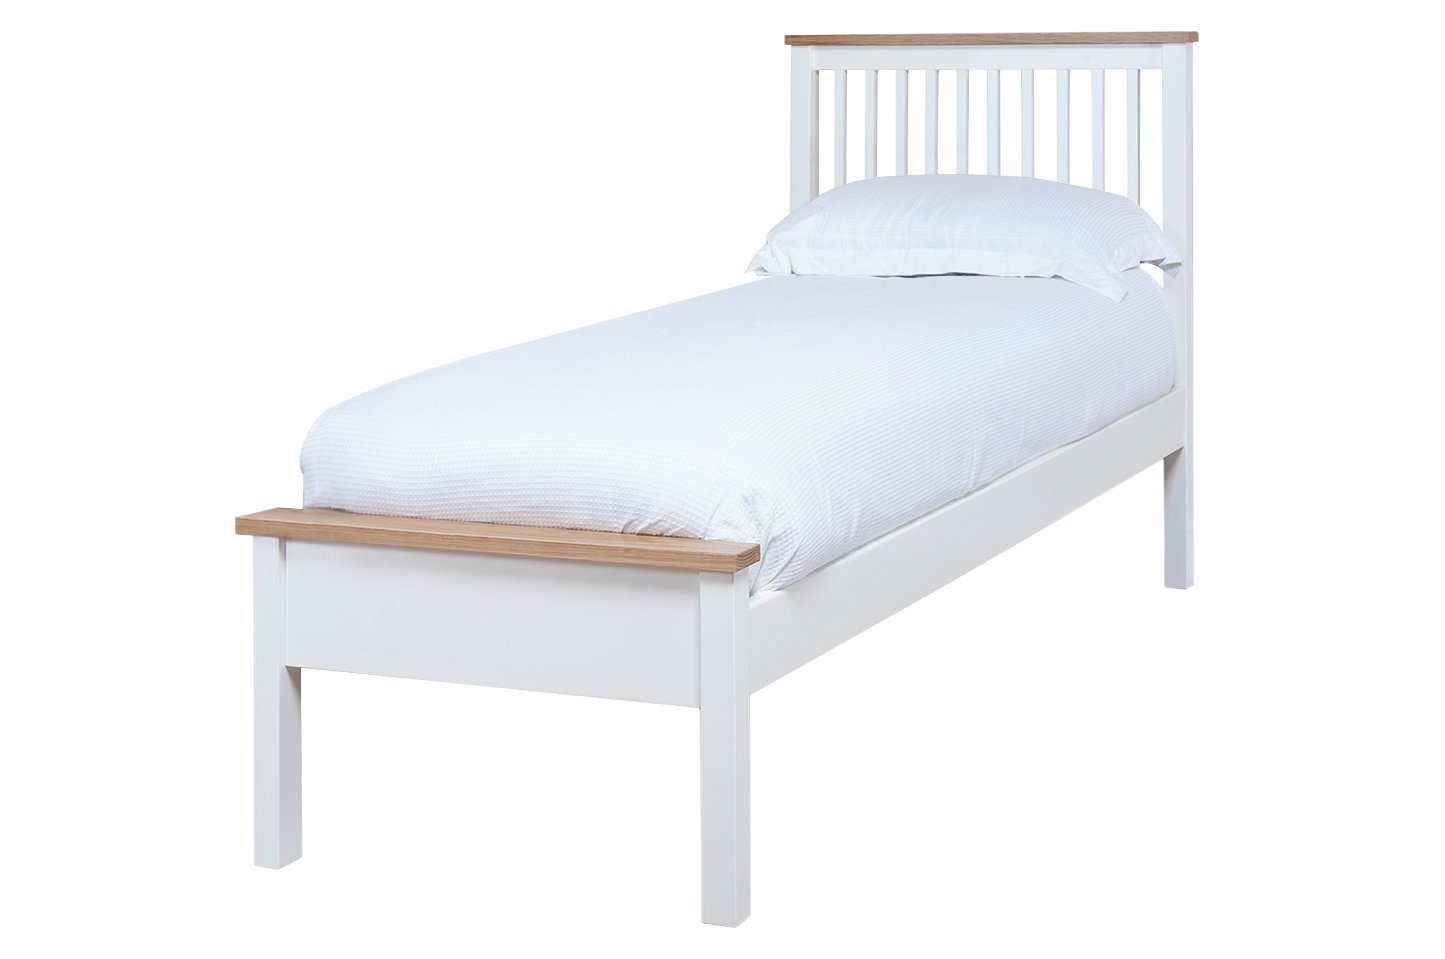 Silentnight Montreal Single Bed Frame - Two Tone